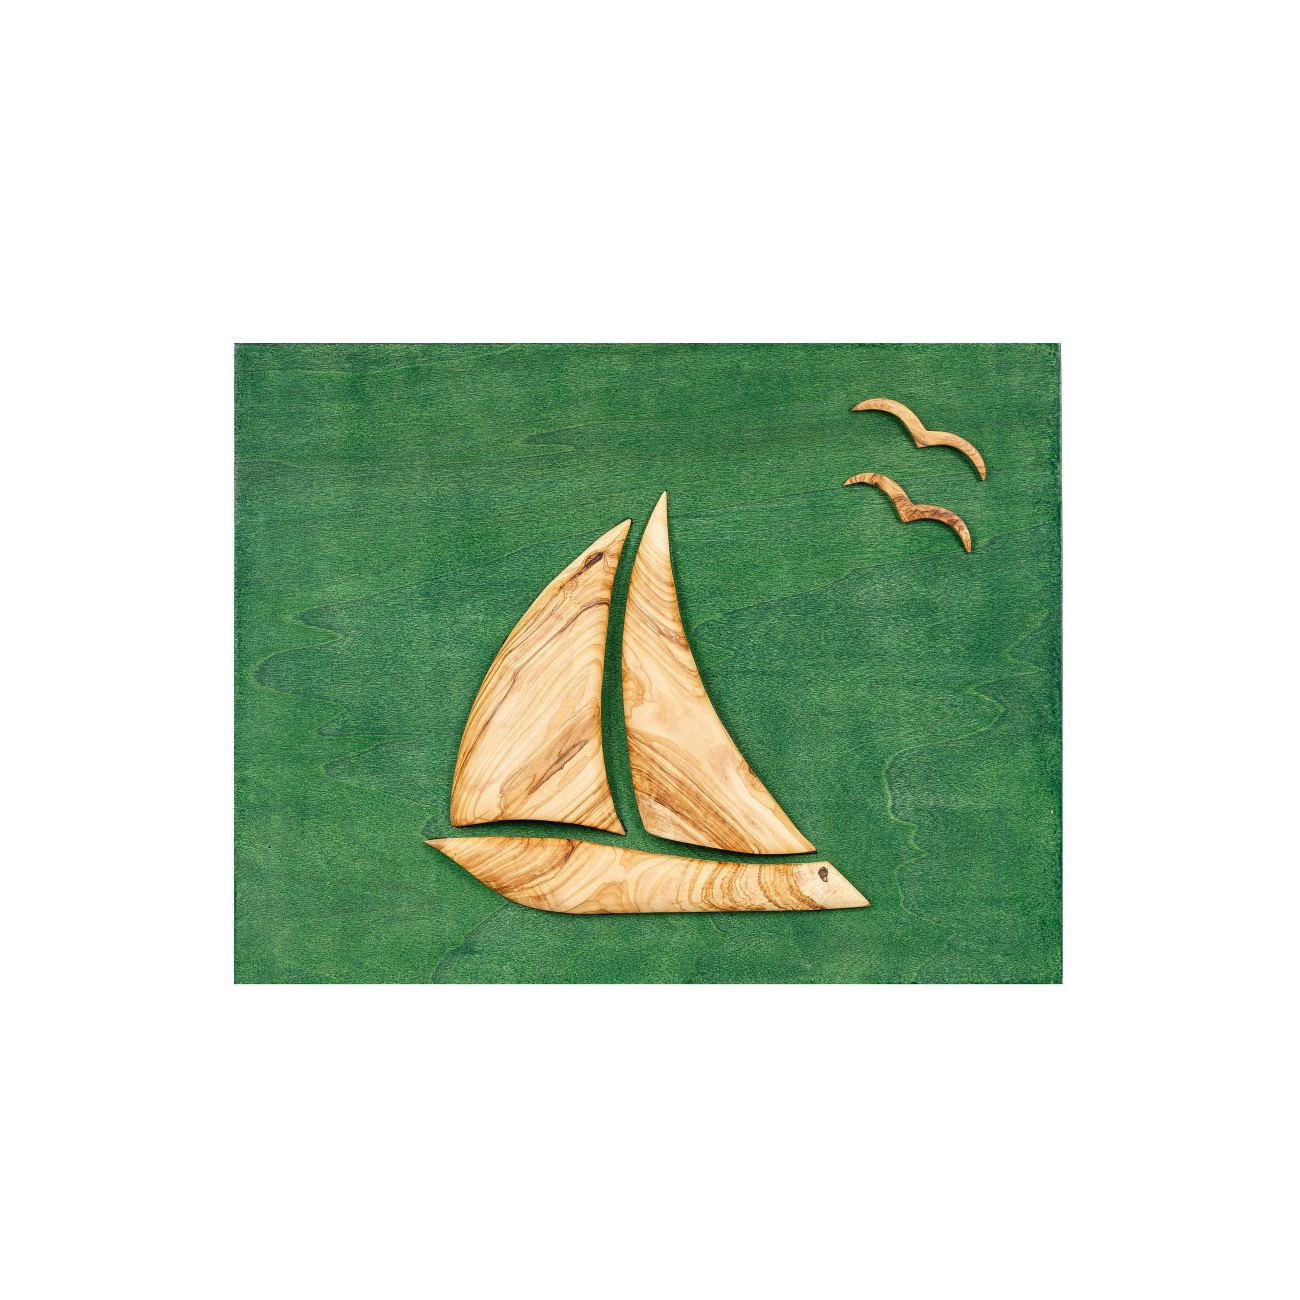 Olive Wood Sailboat, Handmade Modern Wall Decor, Green Wooden Background,  Design A, 45x35cm. Ideal Decoration Gift.